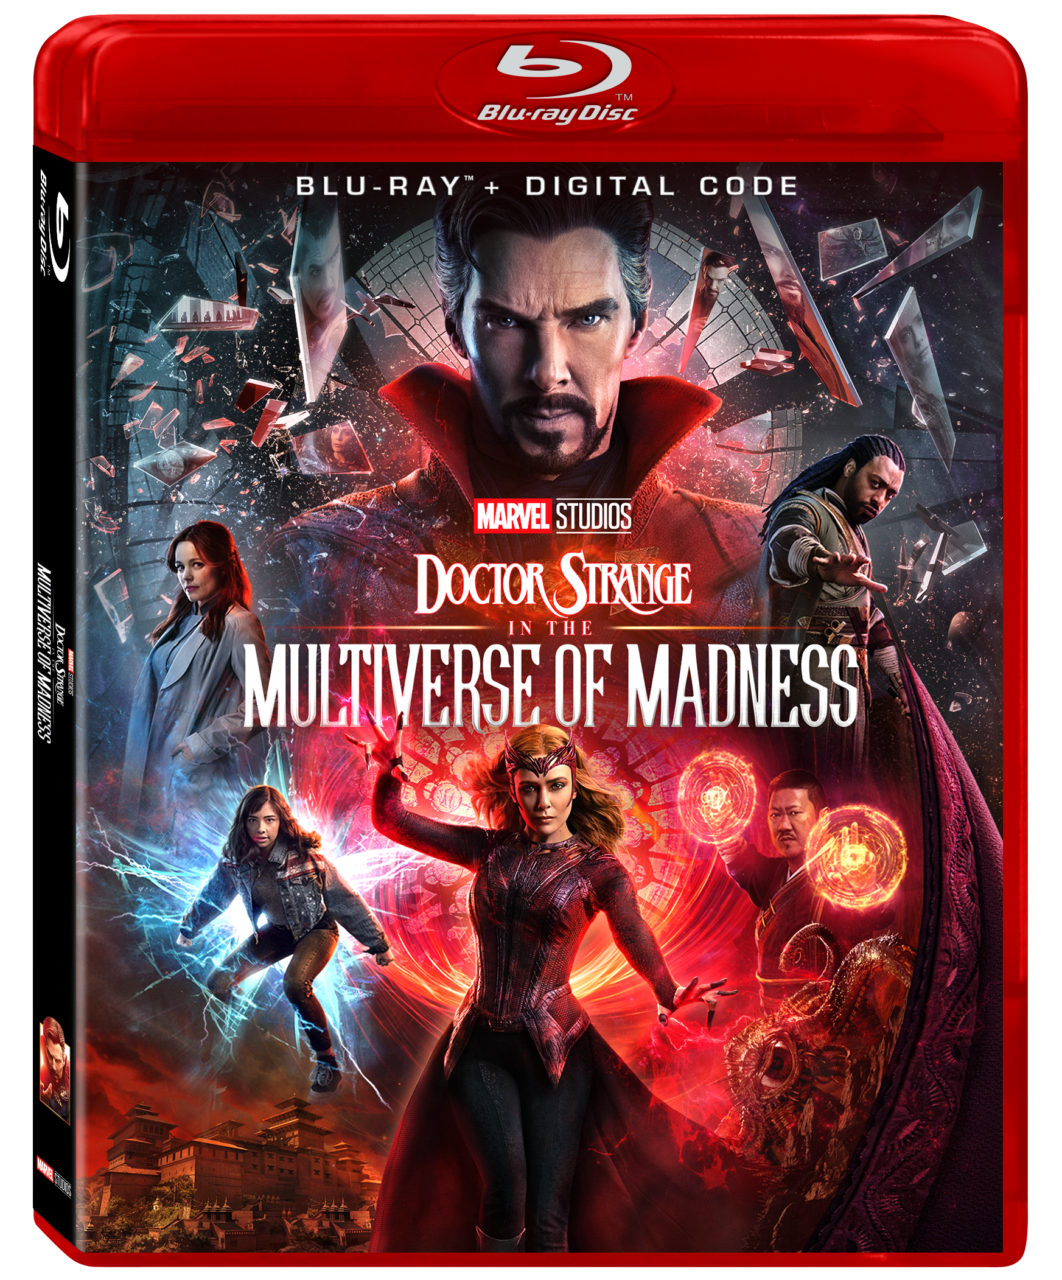 Doctor Strange In The Multiverse Of Madness Blu-Ray Combo Pack cover (Walt Disney Studios Home Entertainment)